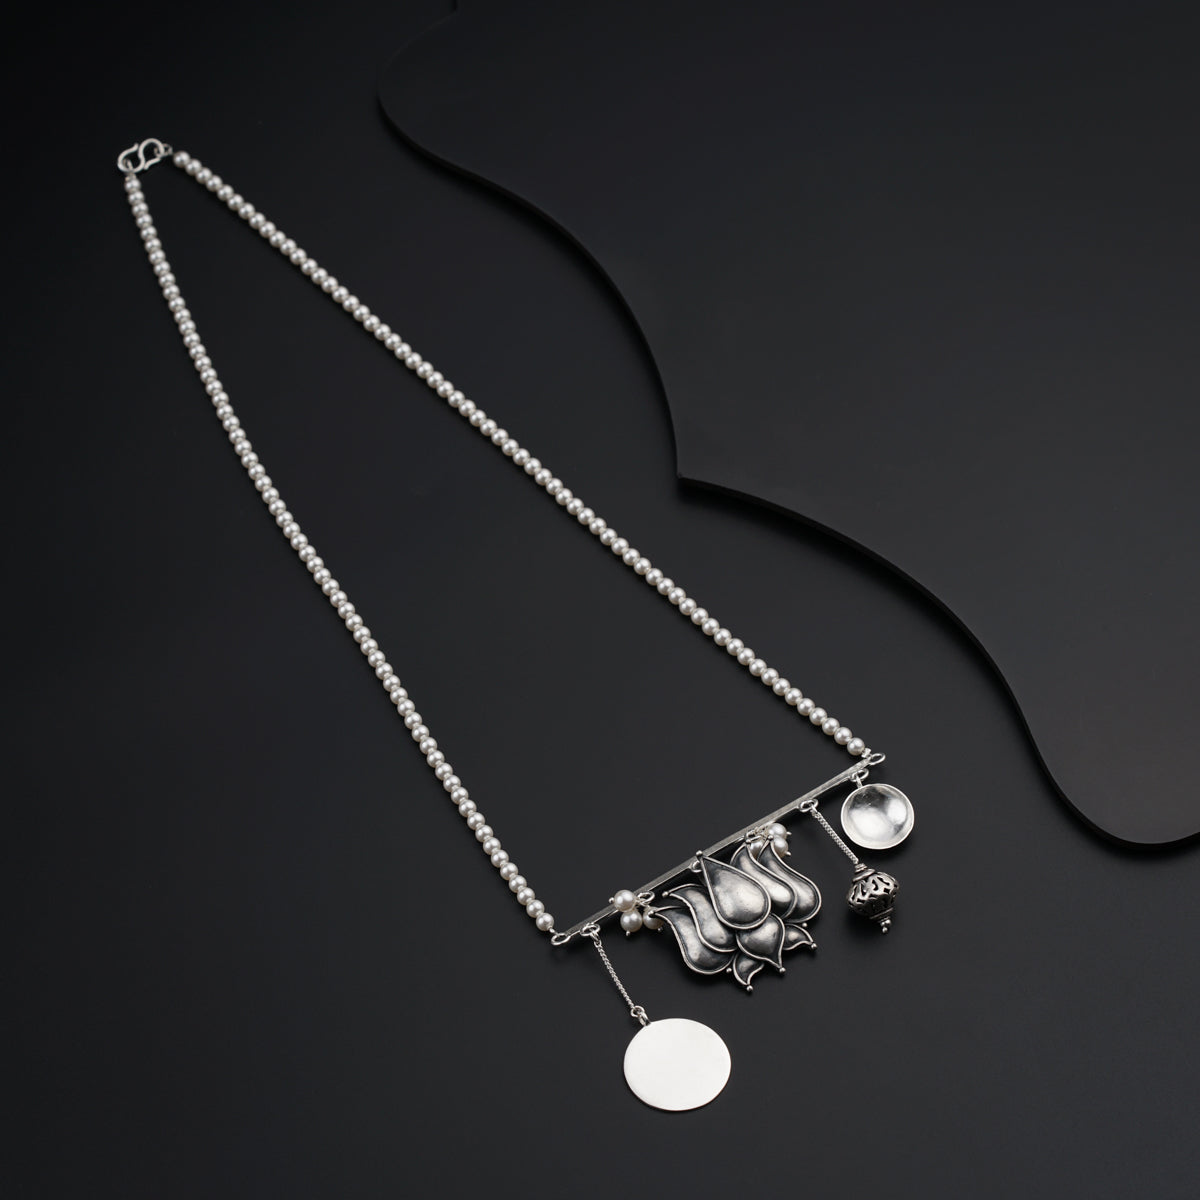 a silver necklace with a cat and a ball on it